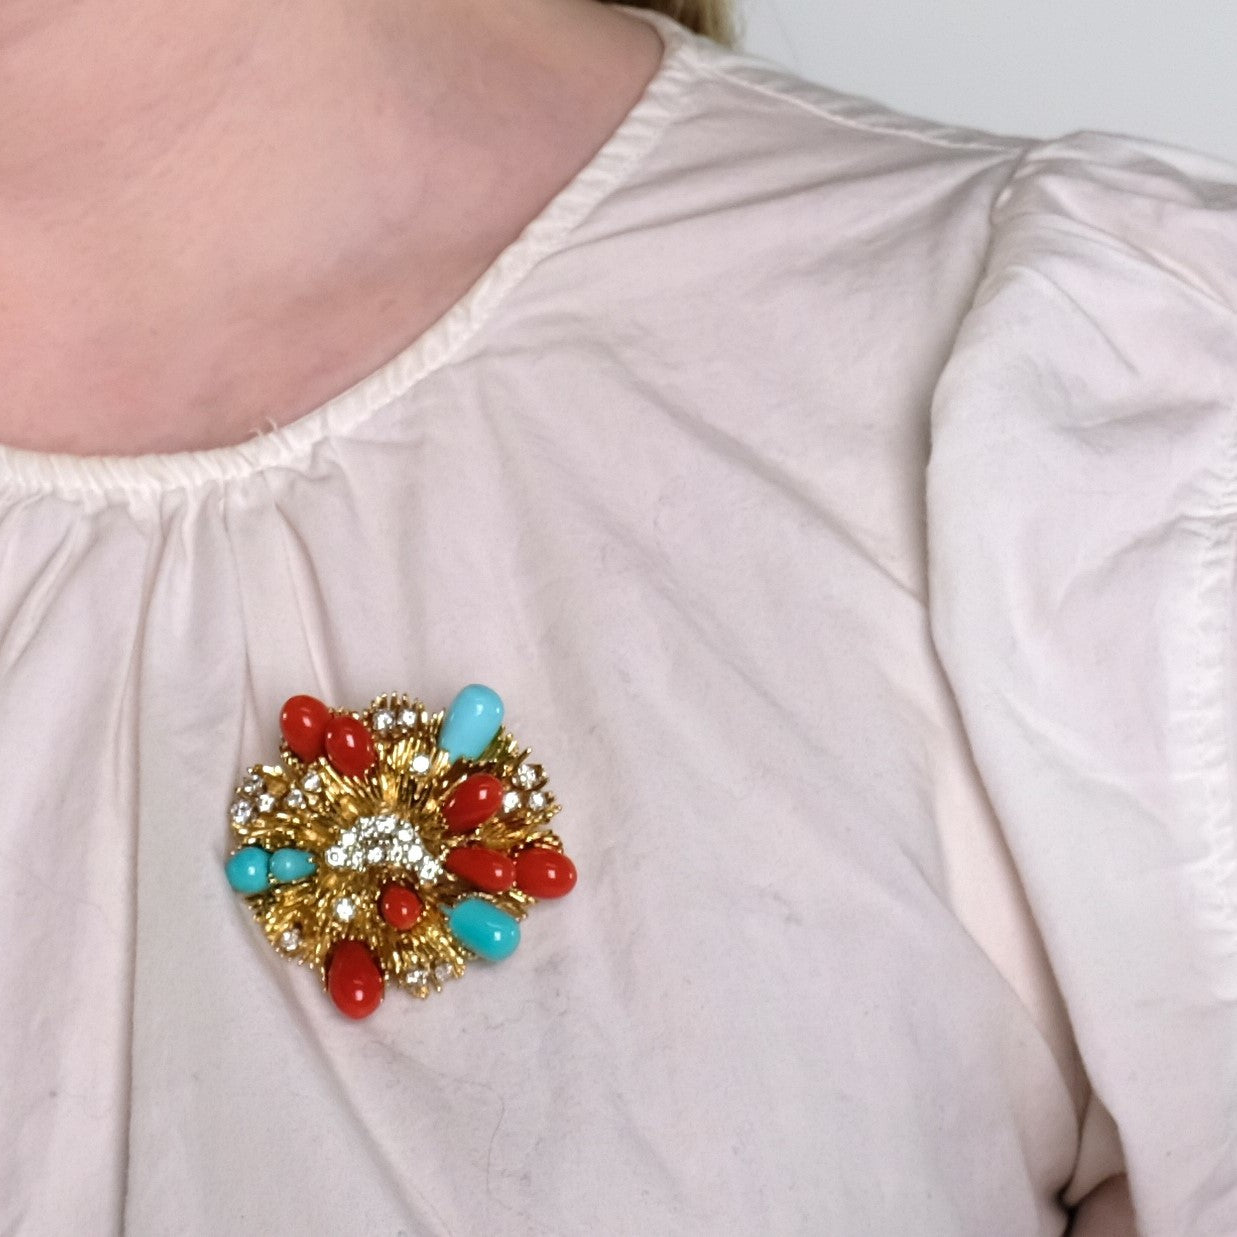 Tiffany & Co. 1960s Platinum & Yellow Gold Diamond, Coral & Turquoise Brooch worn on white blouse